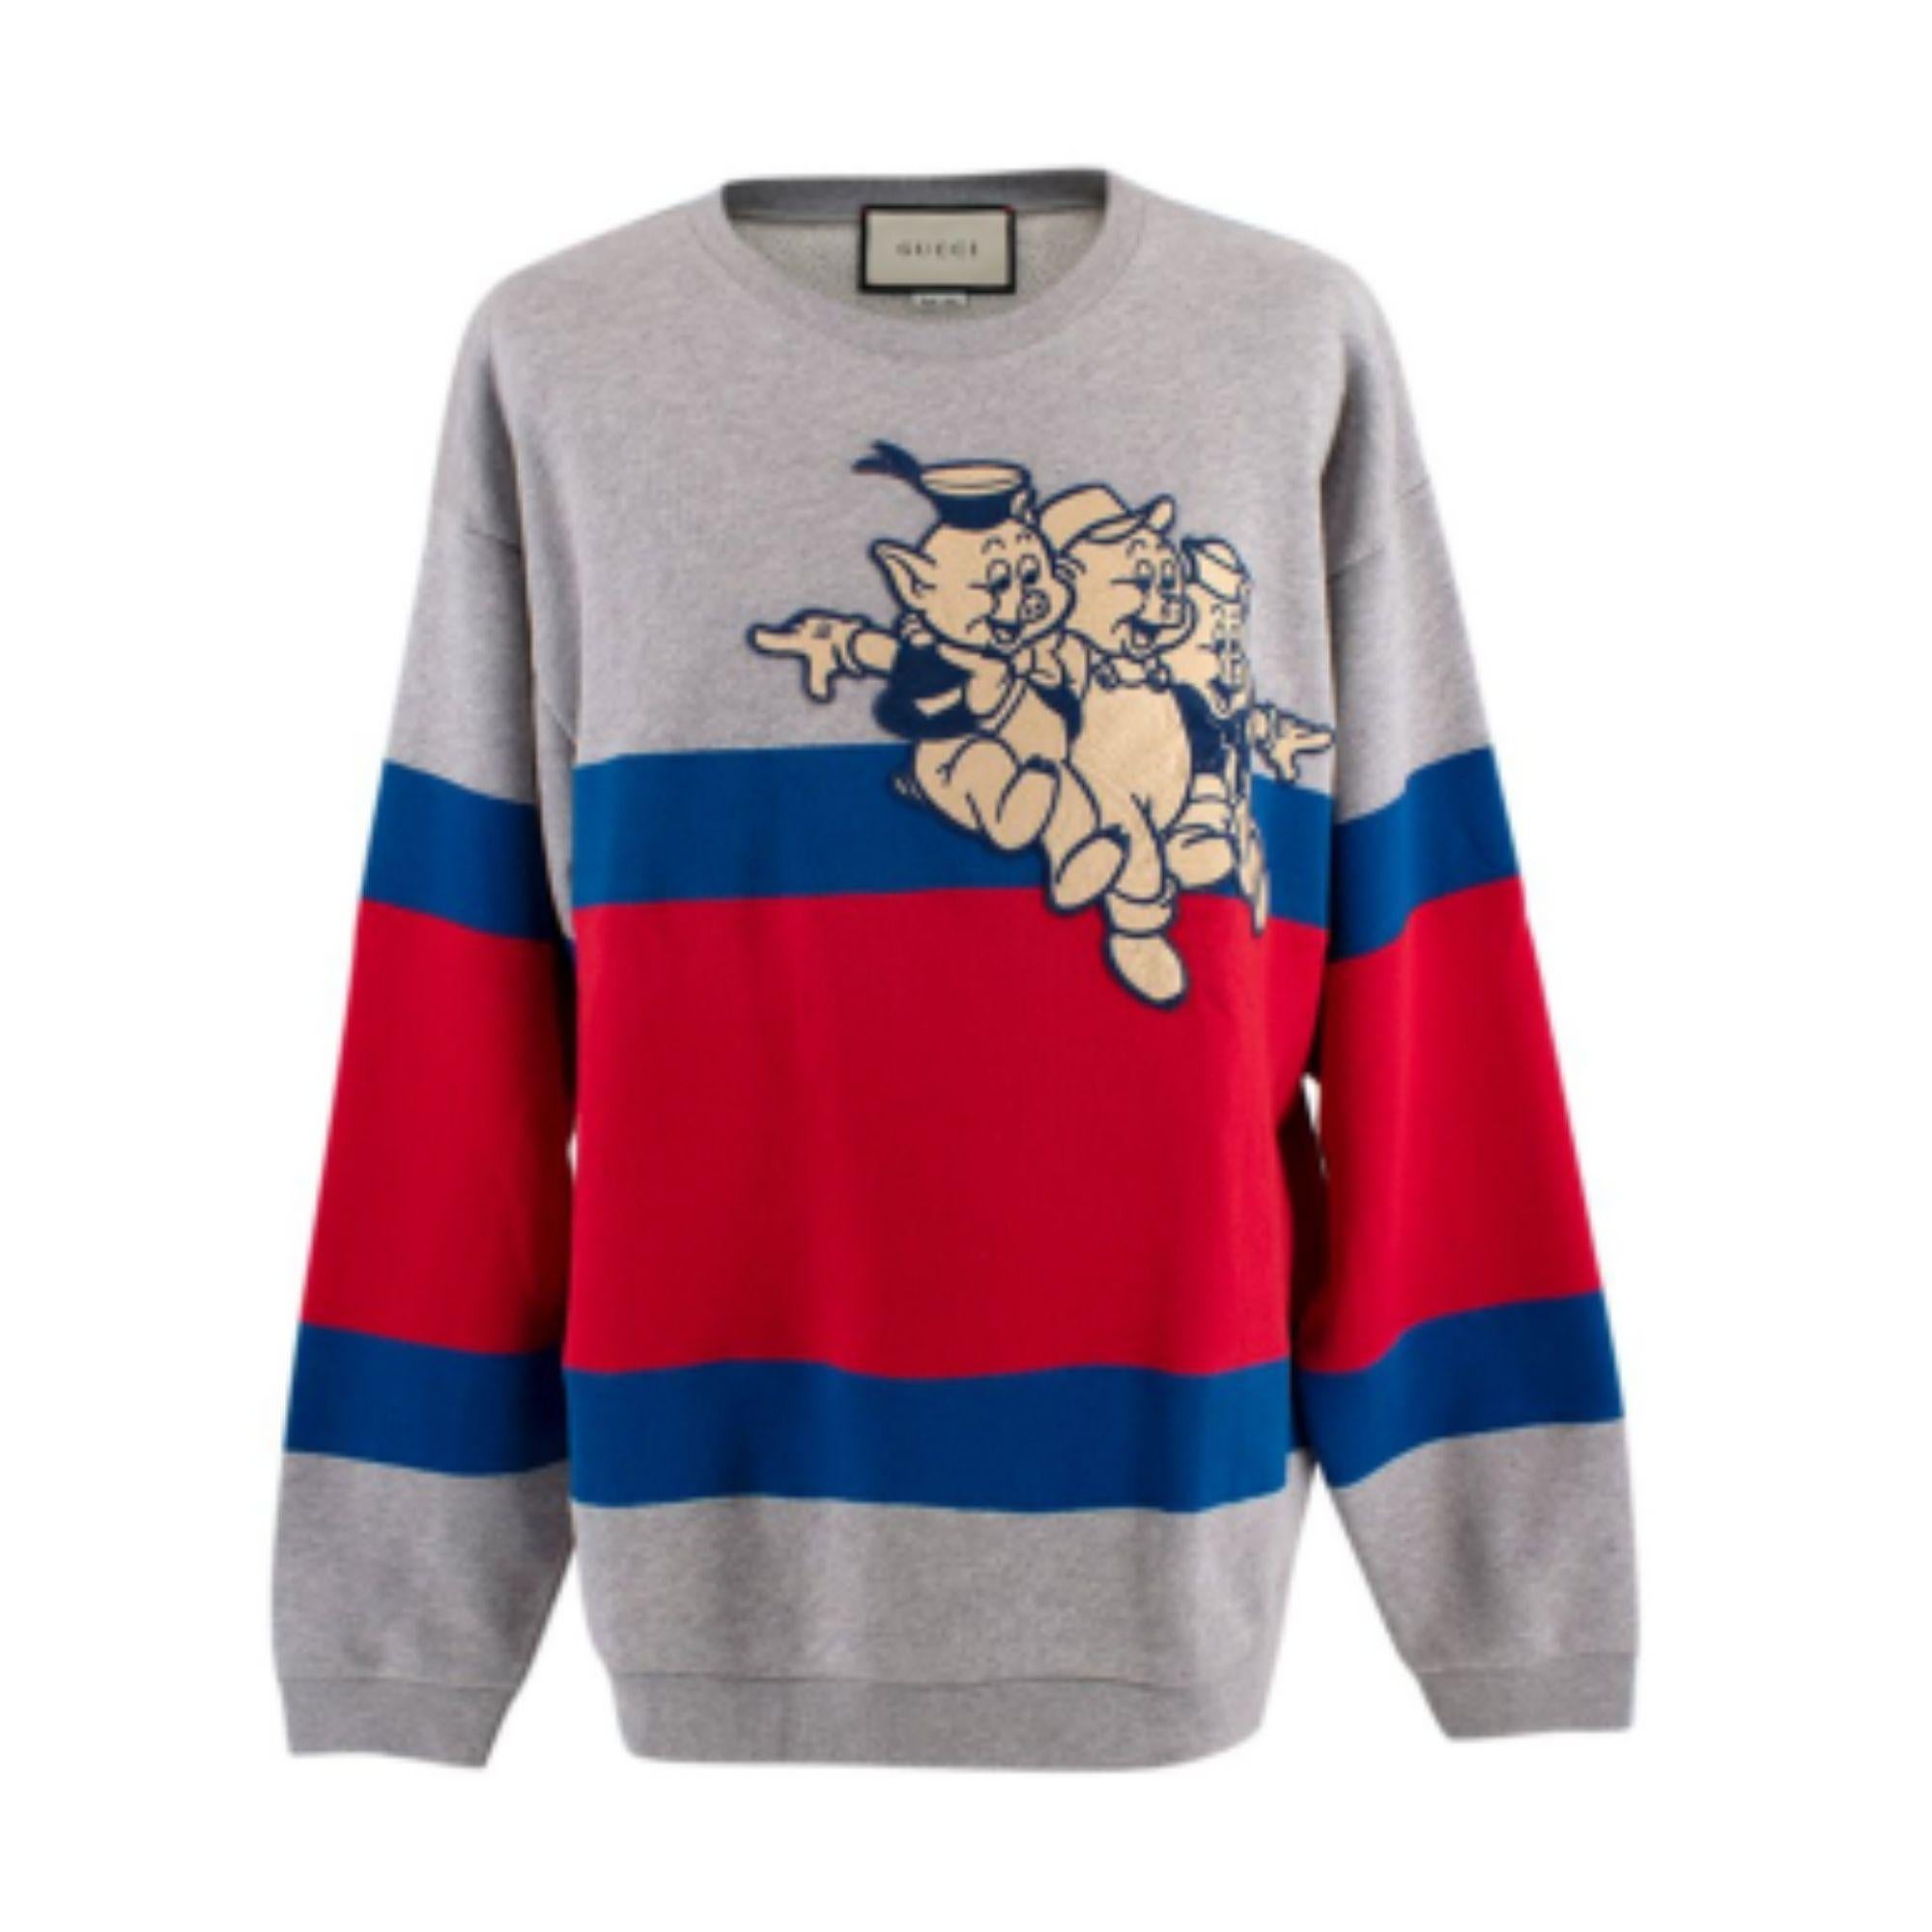 Gucci x Disney Grey '3 Little Pigs' Sweatshirt

- Crewneck
- Ribbed cuffs, waist and neck
- Large embroidery on front
- Blue and red stripe paneling

Material
100% Cotton
Embroidery: 100% Polyester

Made in Italy

PLEASE NOTE, THESE ITEMS ARE